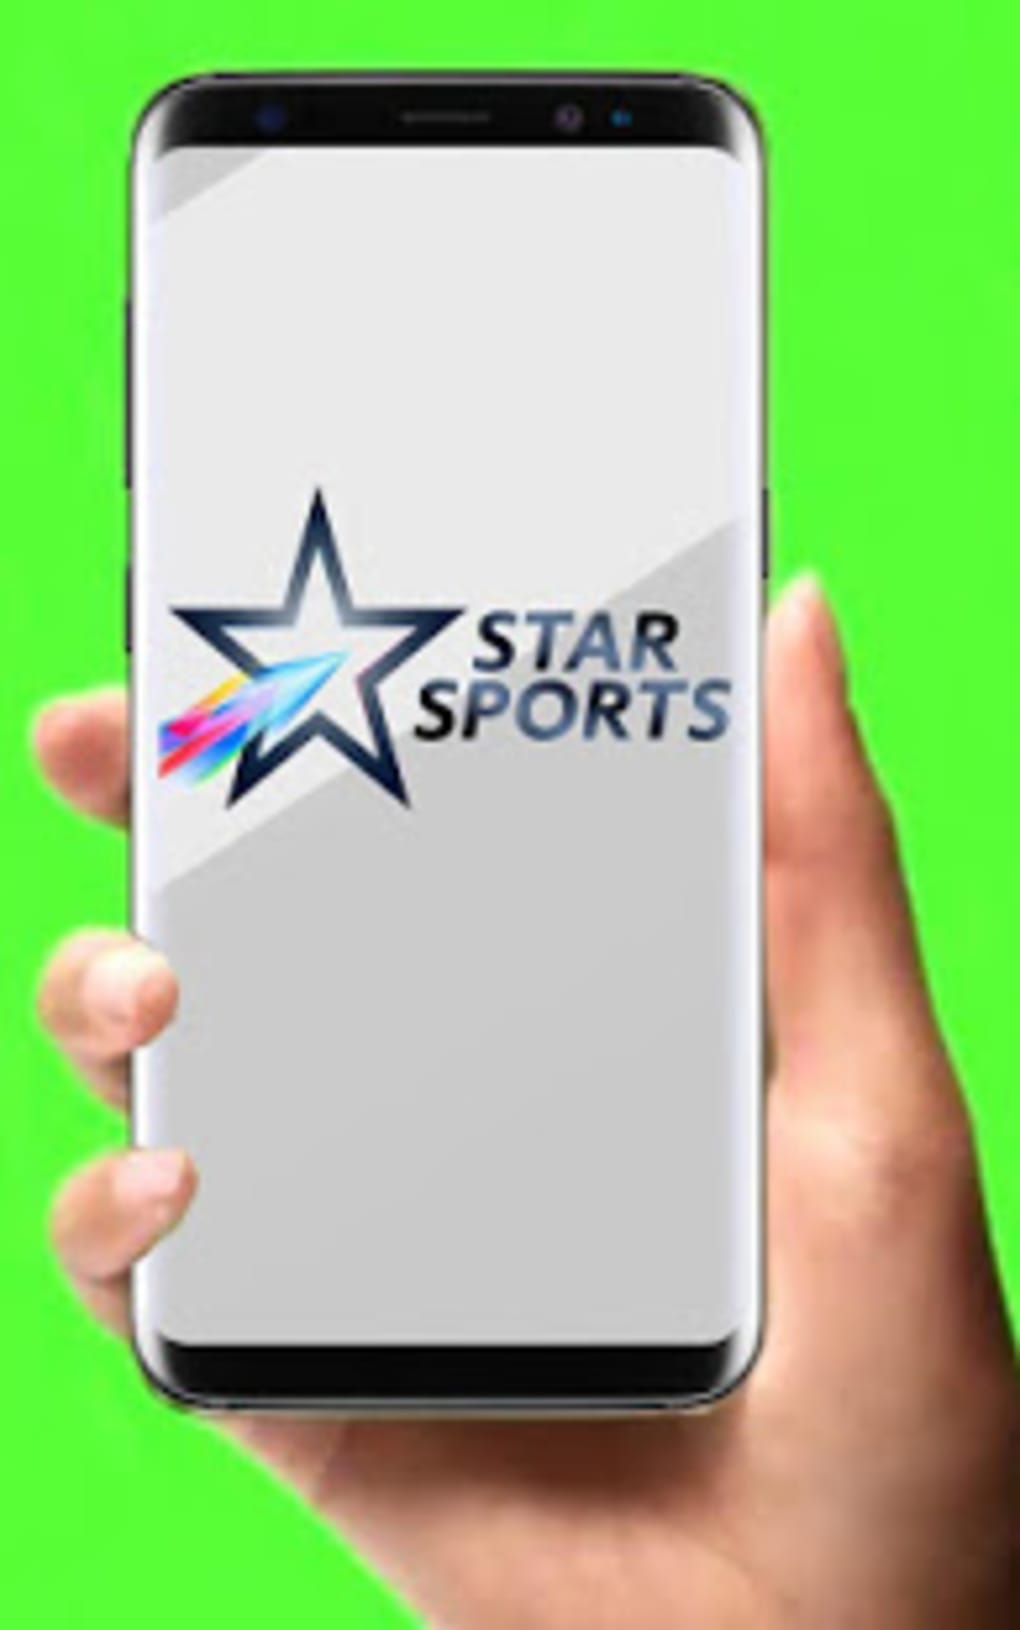 Star crickets star sport live 2019 for Android